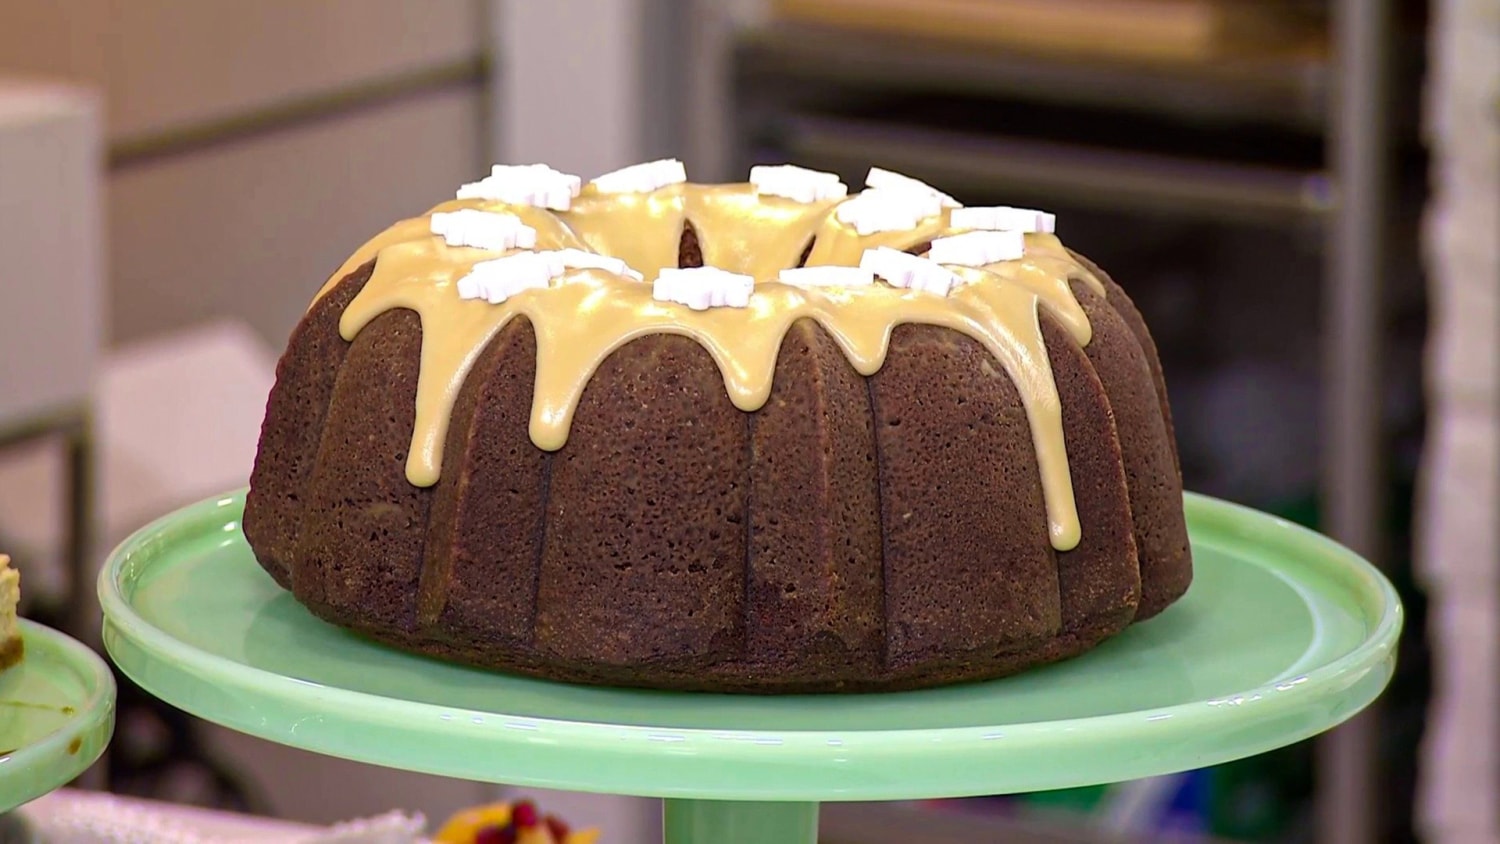 Gingerbread bundt cake in the most beautiful forest cake pan - The